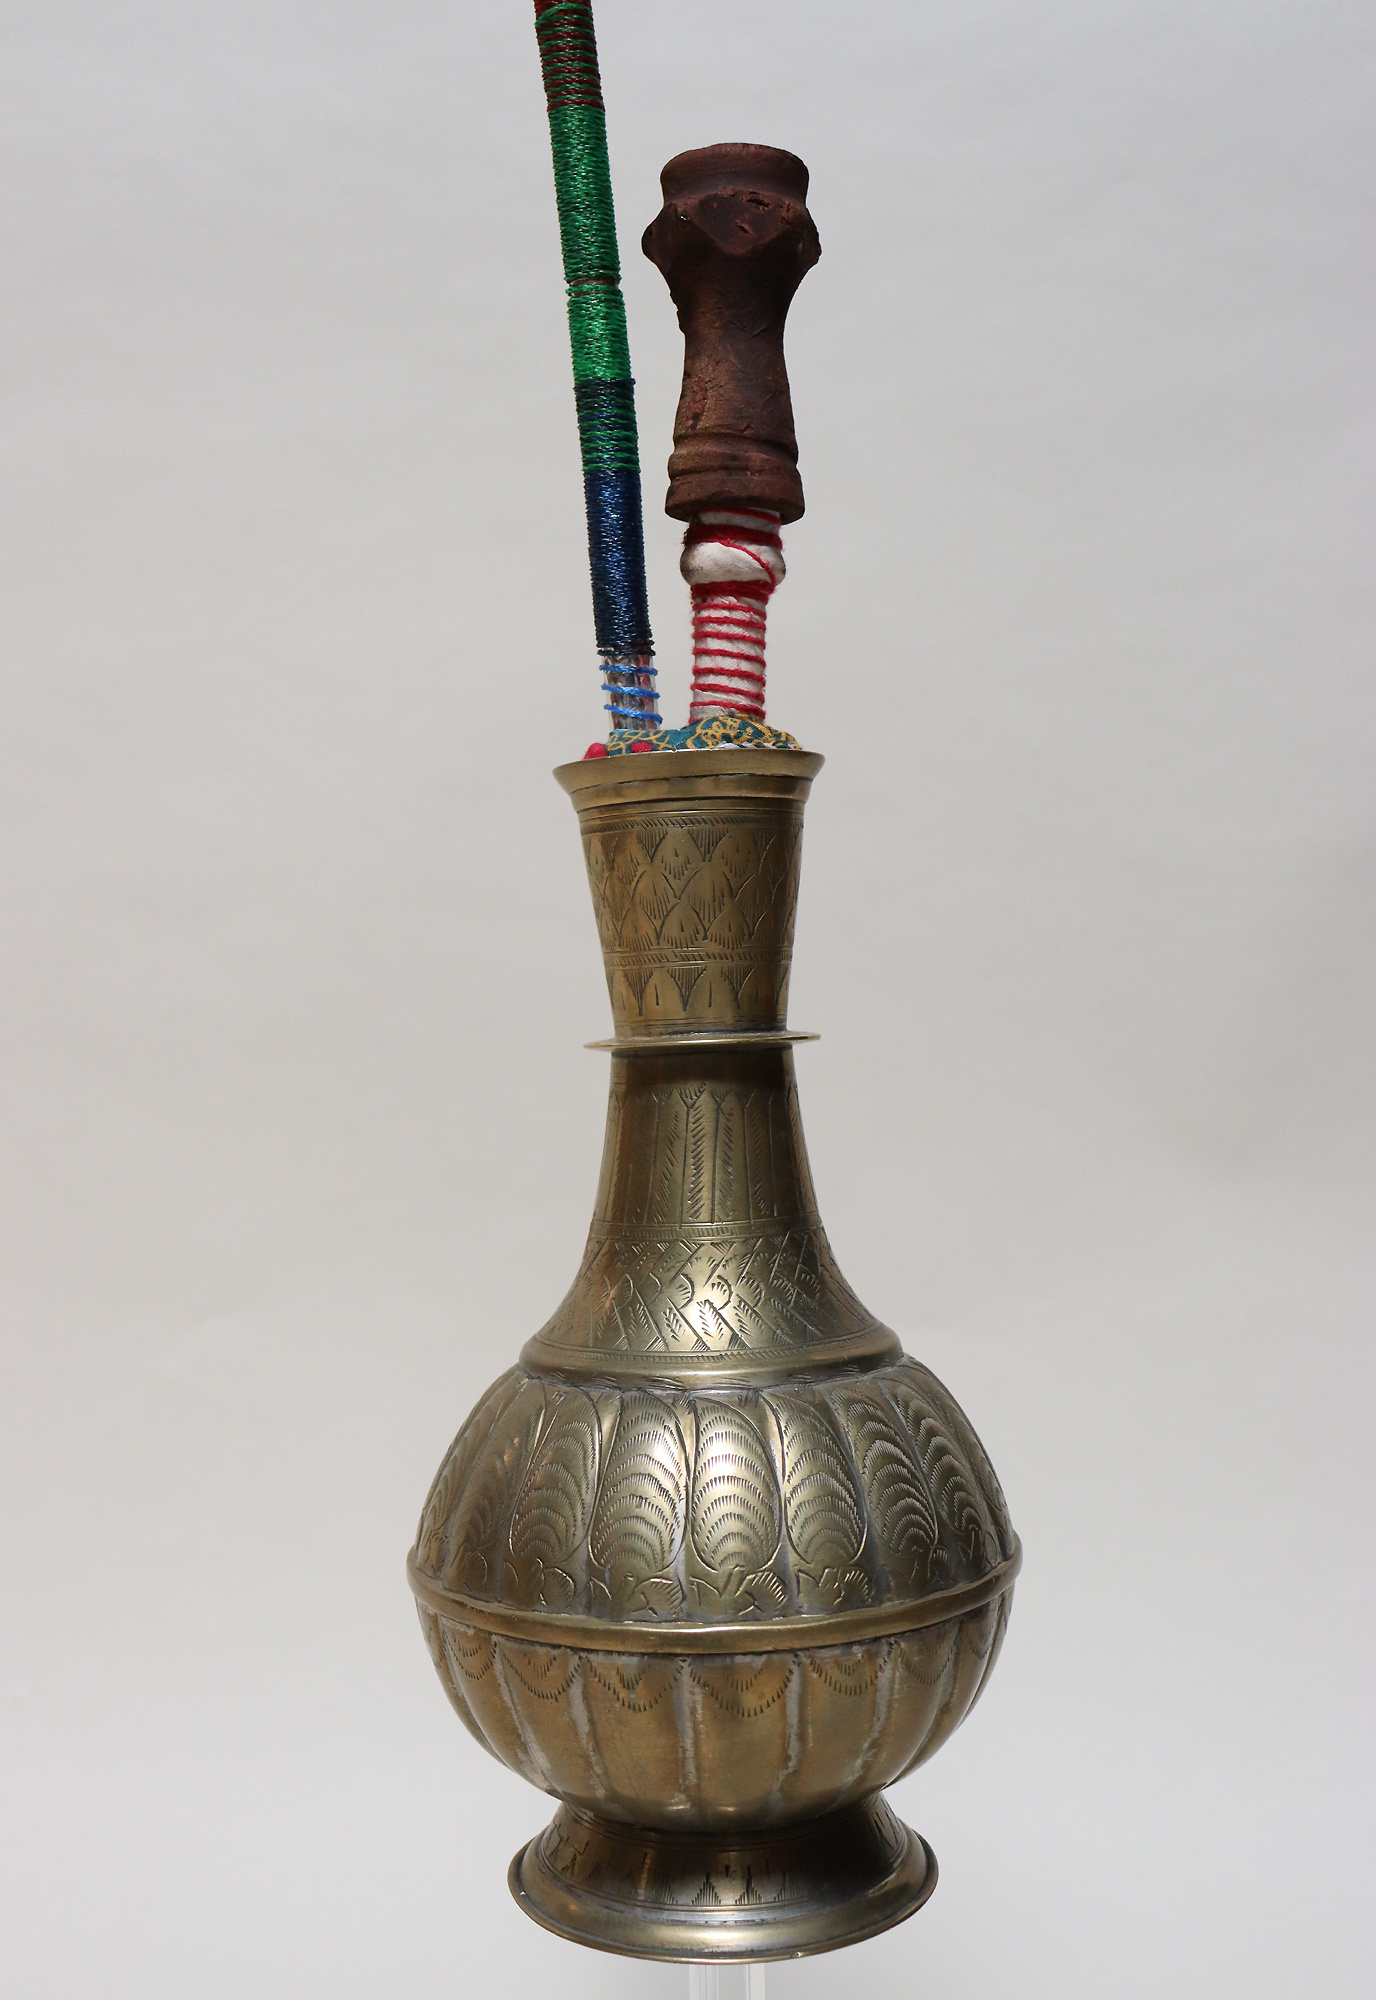 Antique Engraved Brass Hookah Shisha hubble-bubble from Afghanistan No:23/15